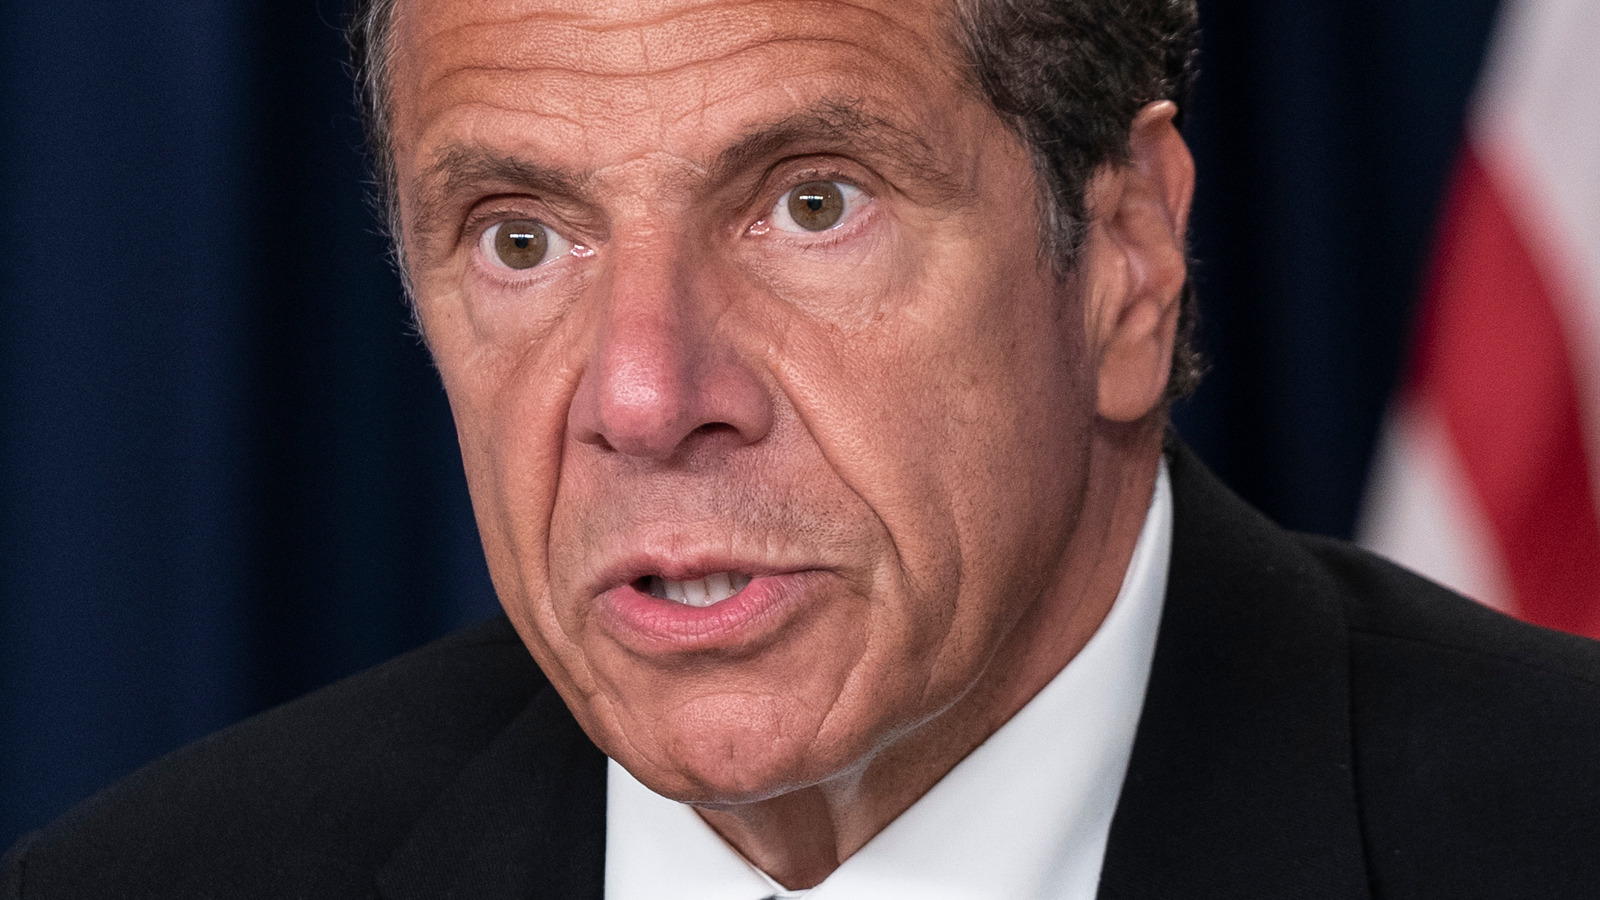 What Is Andrew Cuomo Going To Do Next?